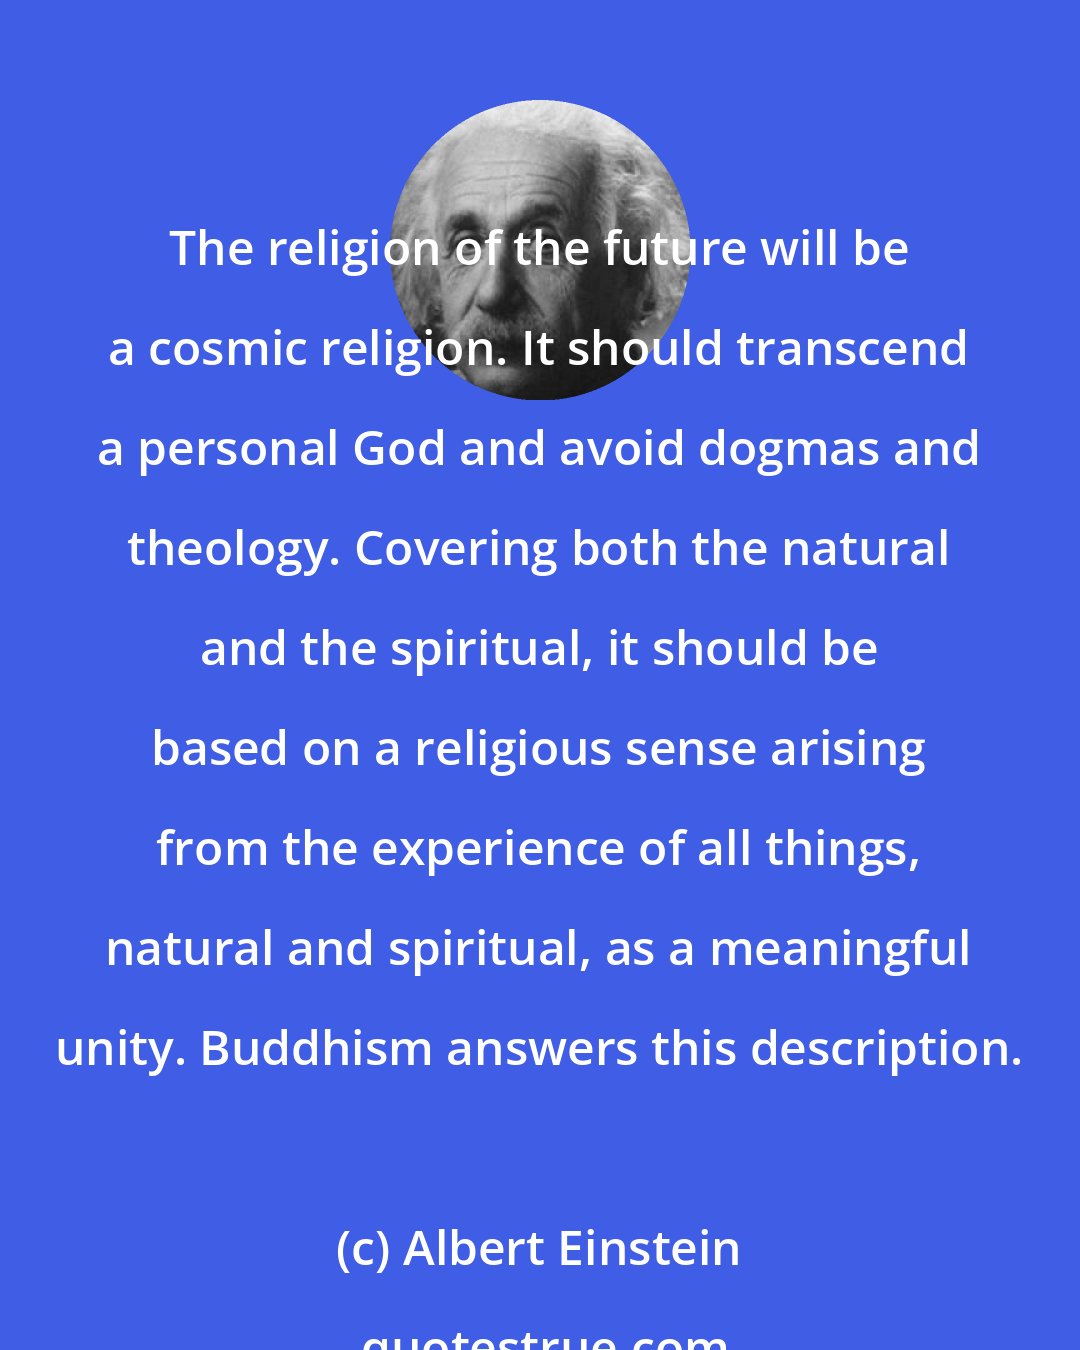 Albert Einstein: The religion of the future will be a cosmic religion. It should transcend a personal God and avoid dogmas and theology. Covering both the natural and the spiritual, it should be based on a religious sense arising from the experience of all things, natural and spiritual, as a meaningful unity. Buddhism answers this description.